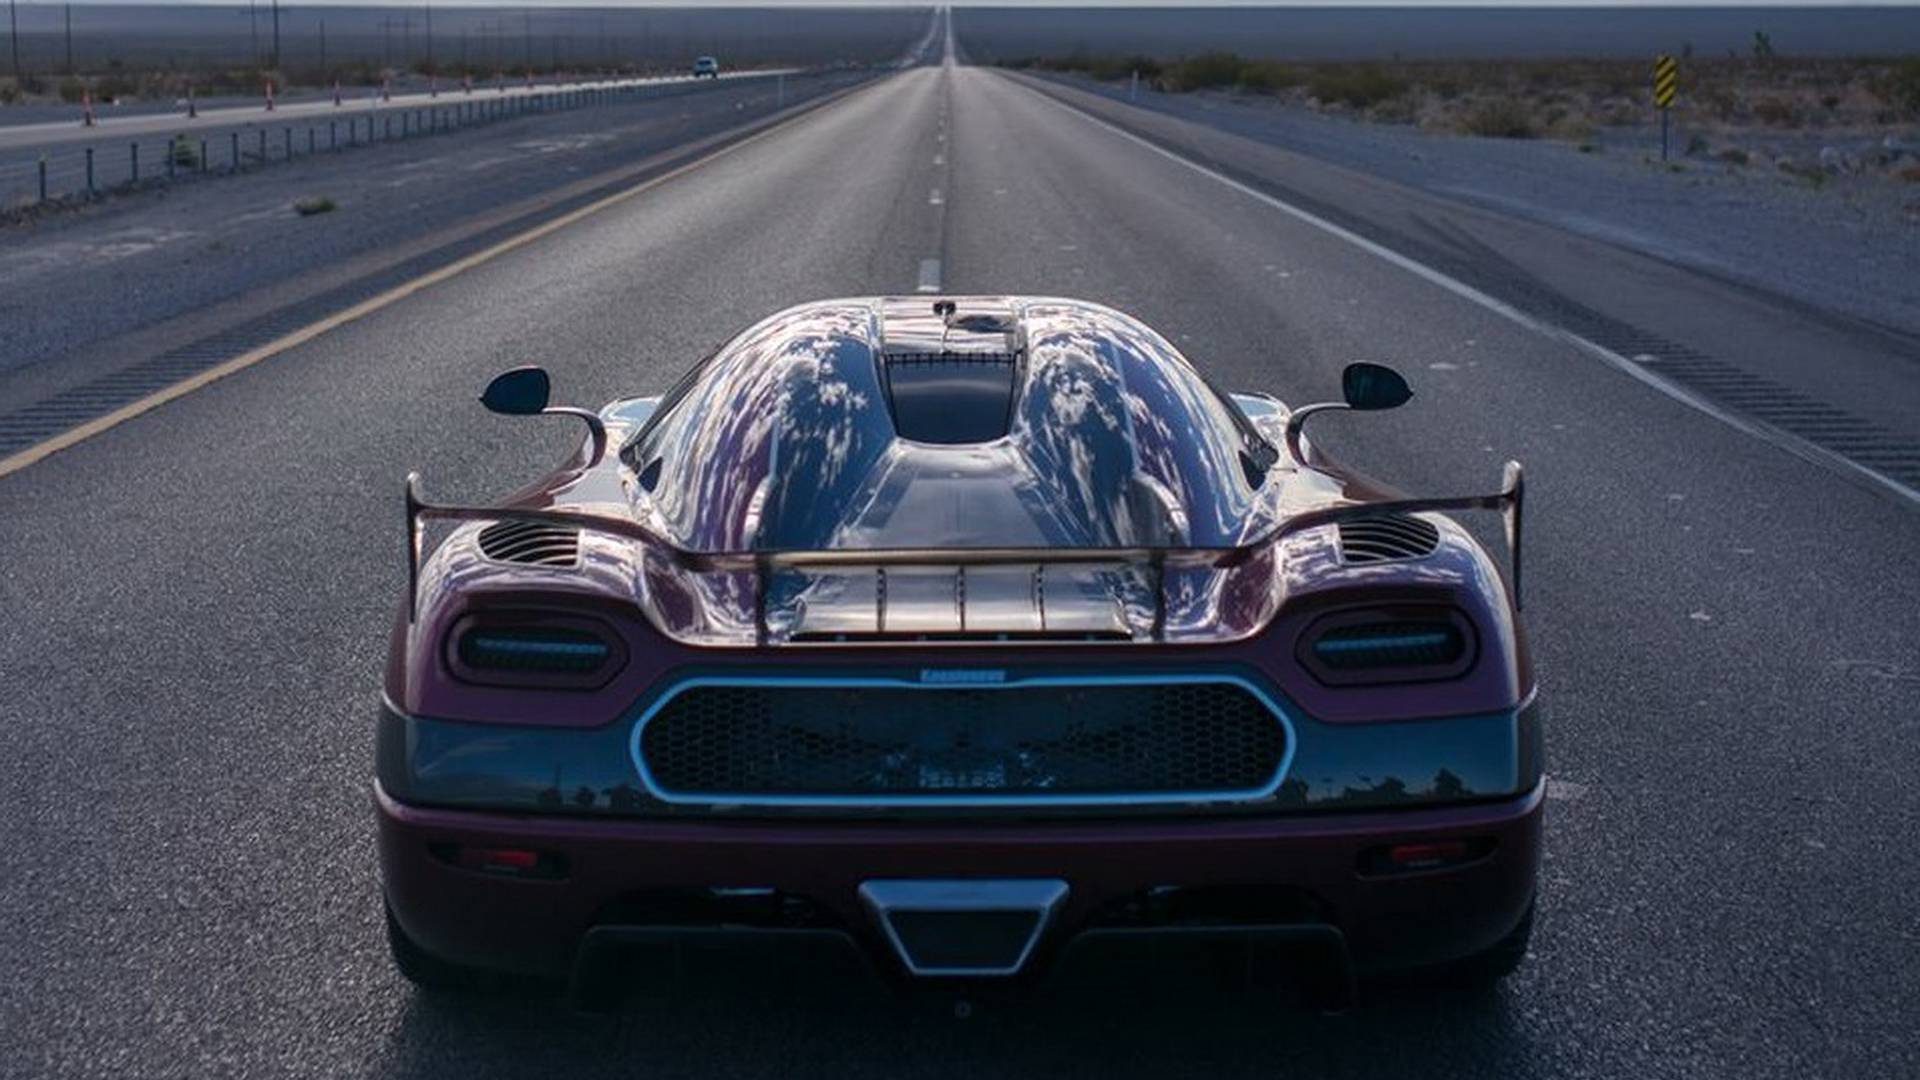 The Koenigsegg Agera RS Top Speed Run Was Car Owner's Idea